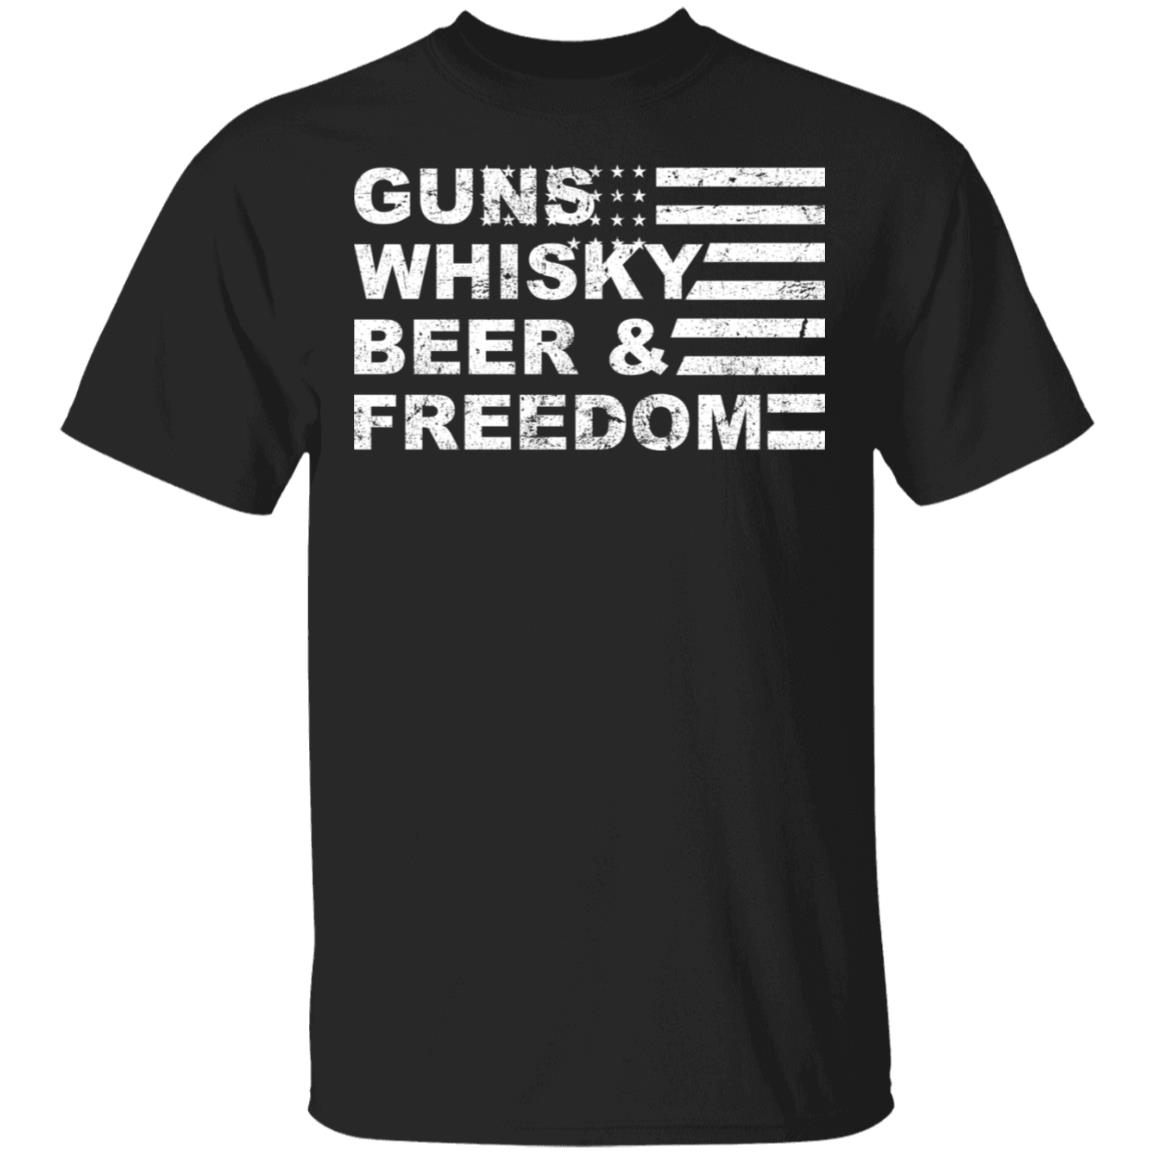 Download Guns whisky beer and freedom shirt - Rockatee